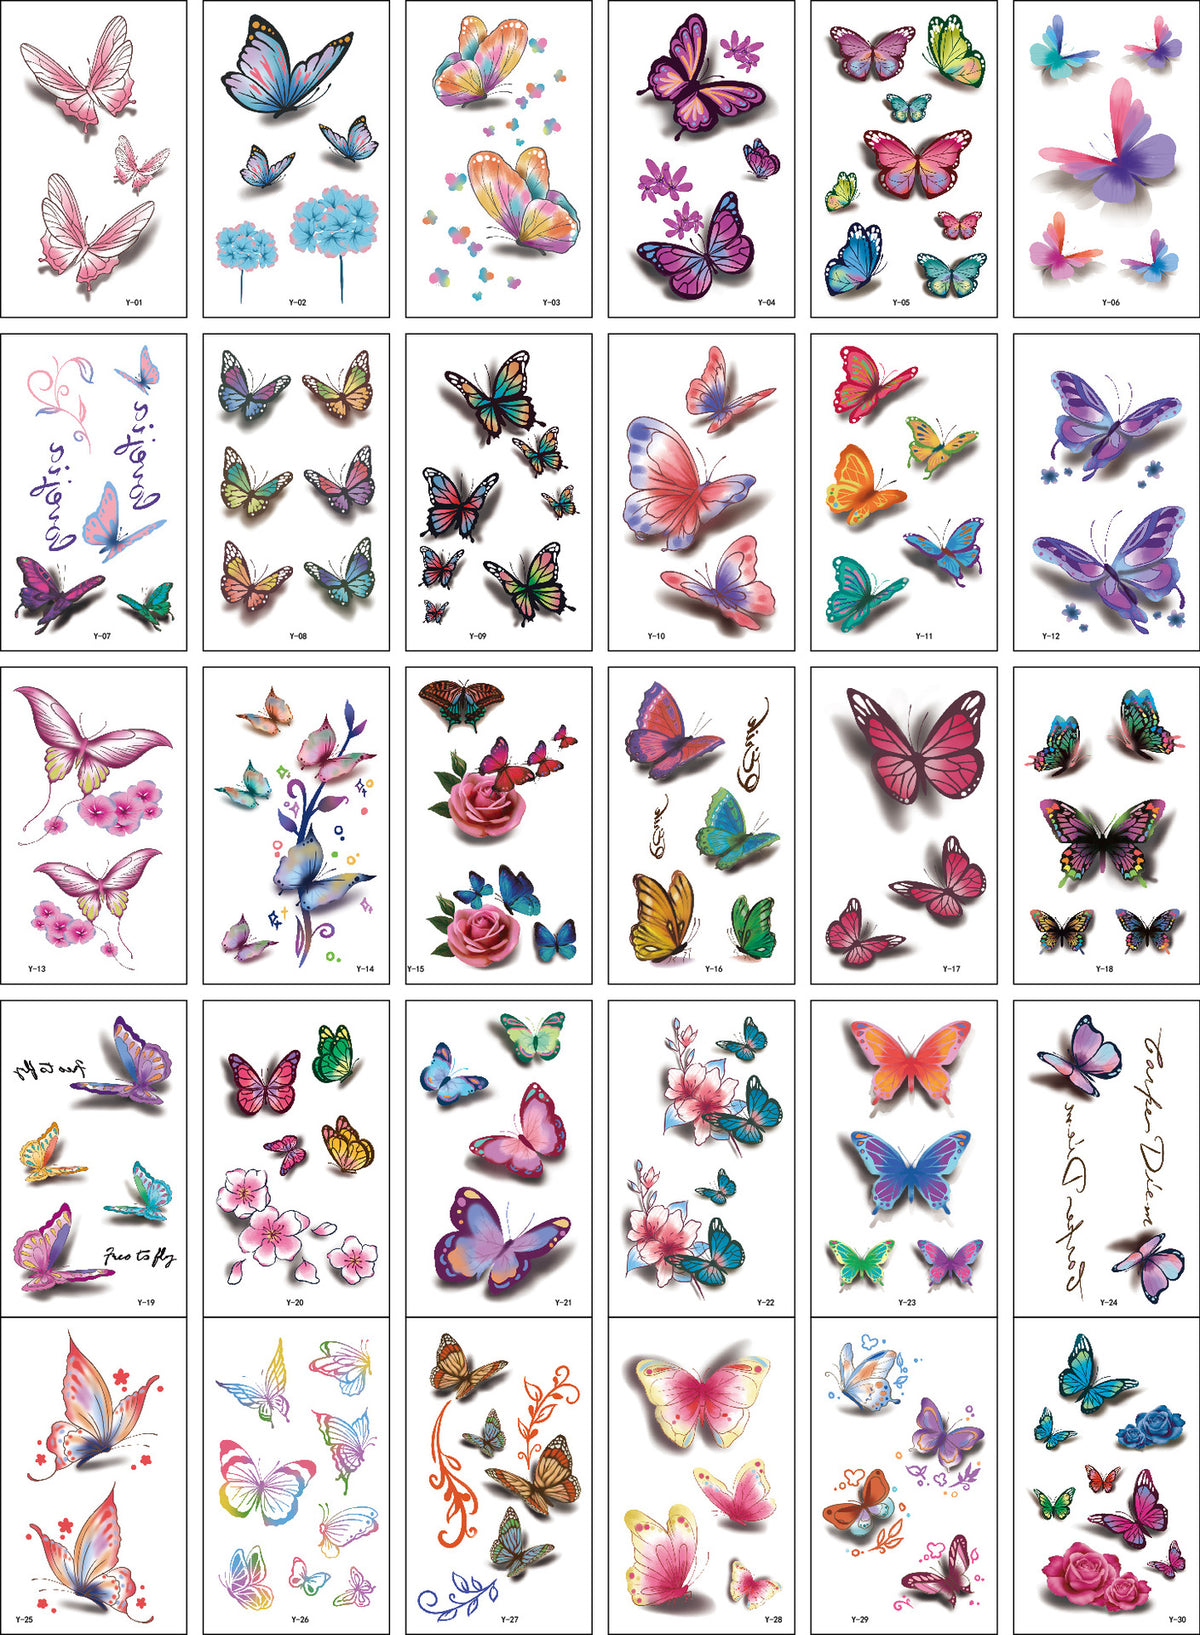 30 Sheet 3D Colorful Butterfly Temporary Tattoos Stickers